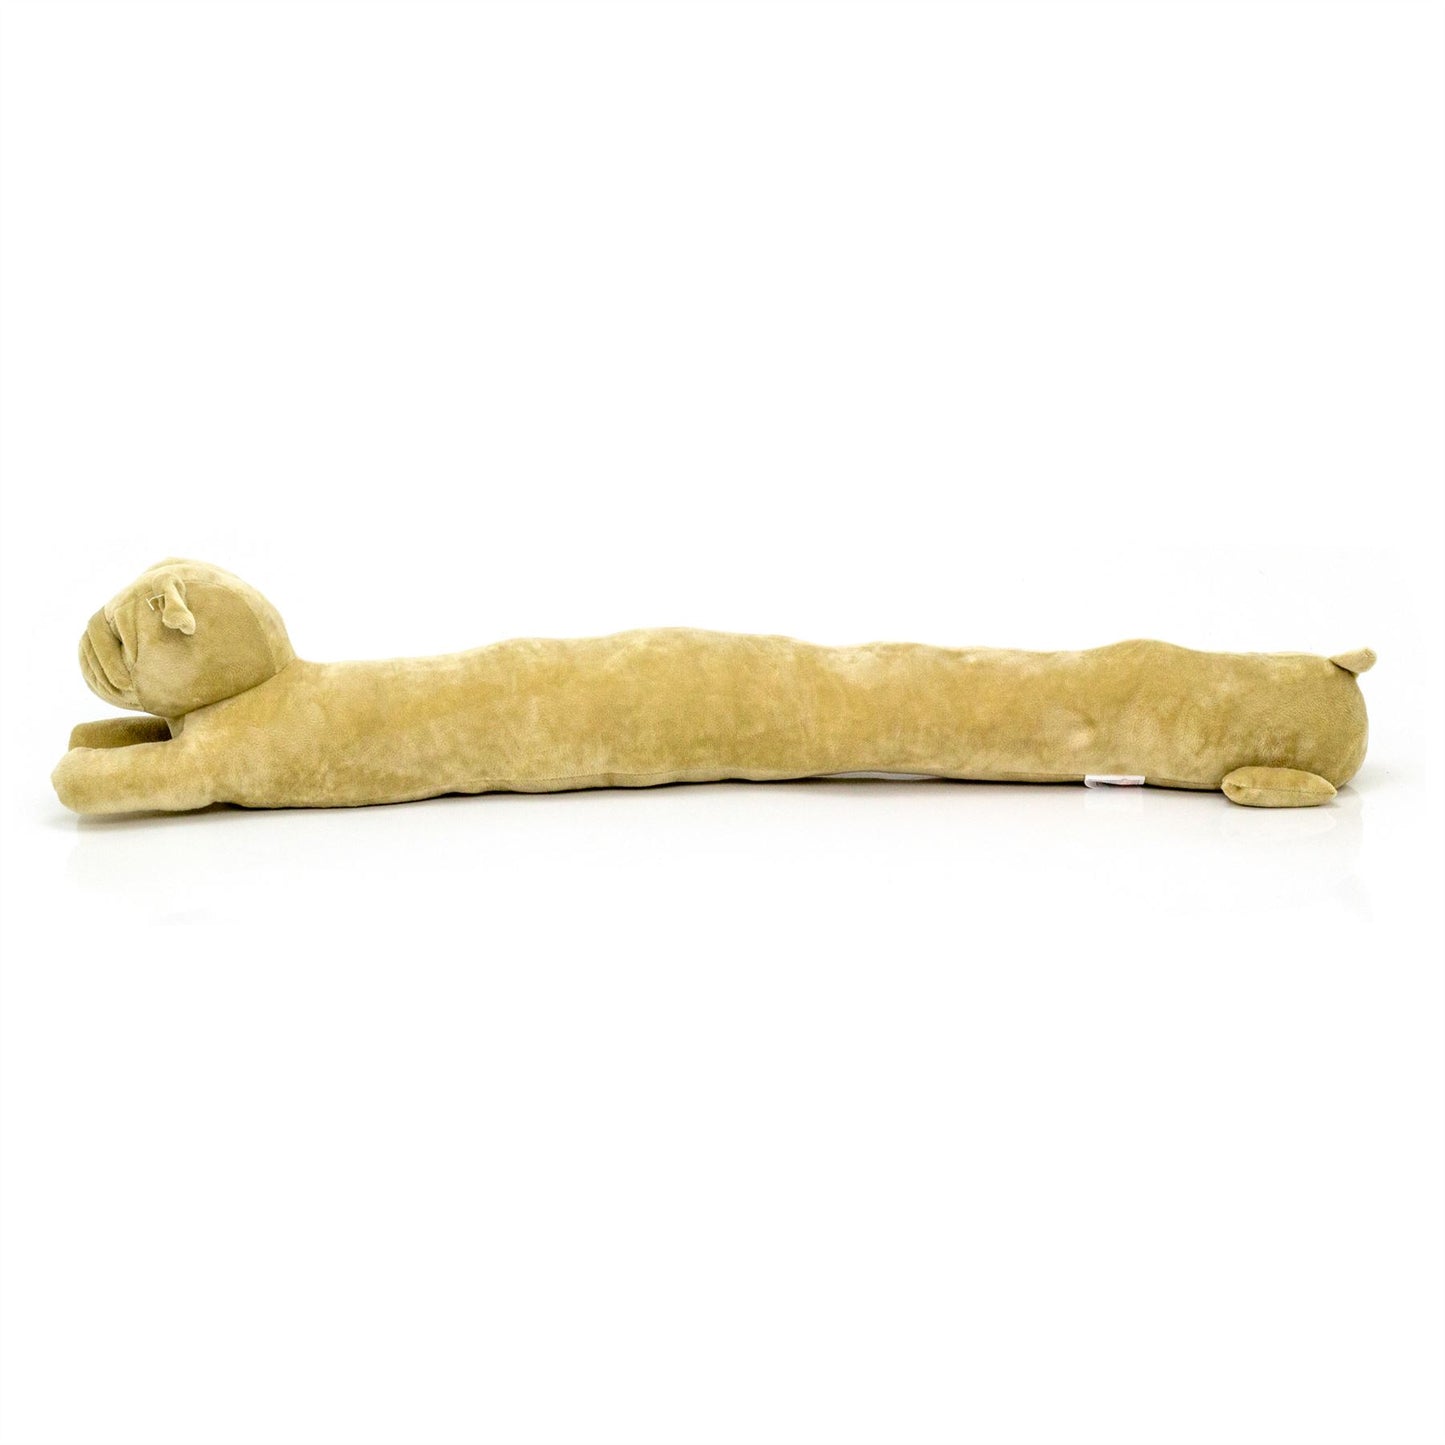 88cm Pug Draught Excluder | Plush Fabric Dog Shaped Door Draft Excluder - Cream